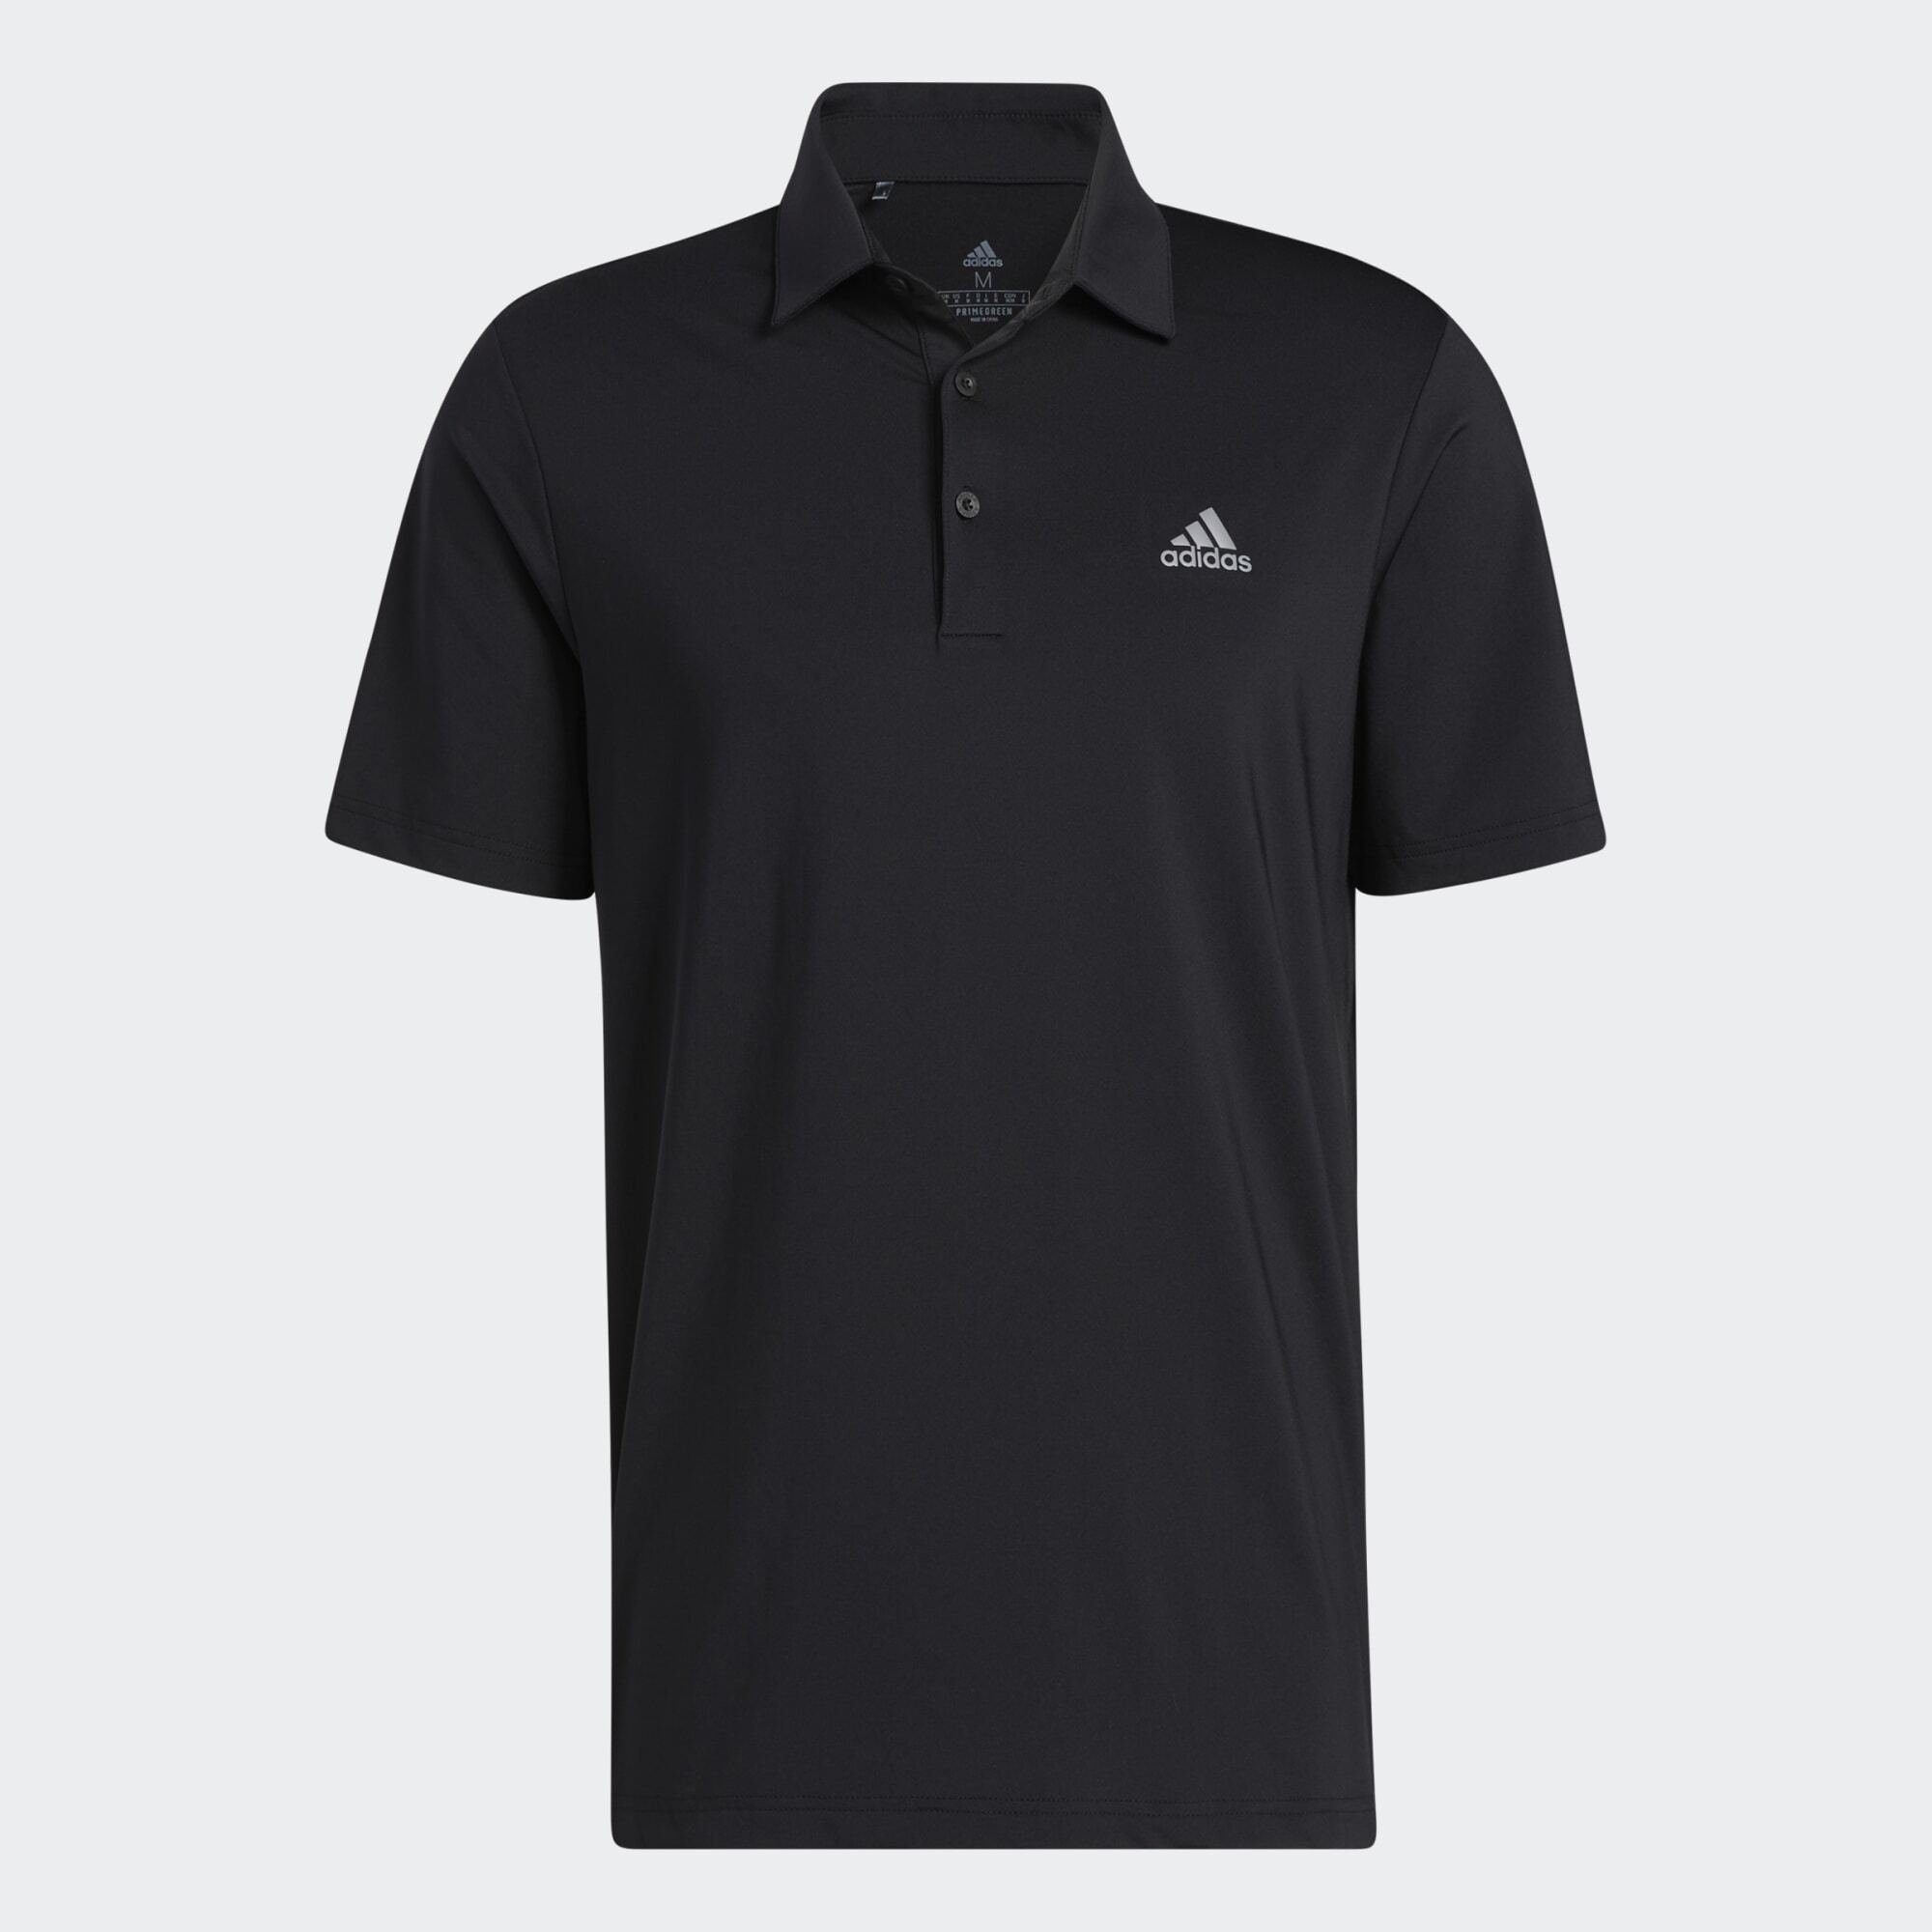 Performance Funktionsshirt POLOSHIRT Black LEFT SOLID ULTIMATE365 CHEST adidas